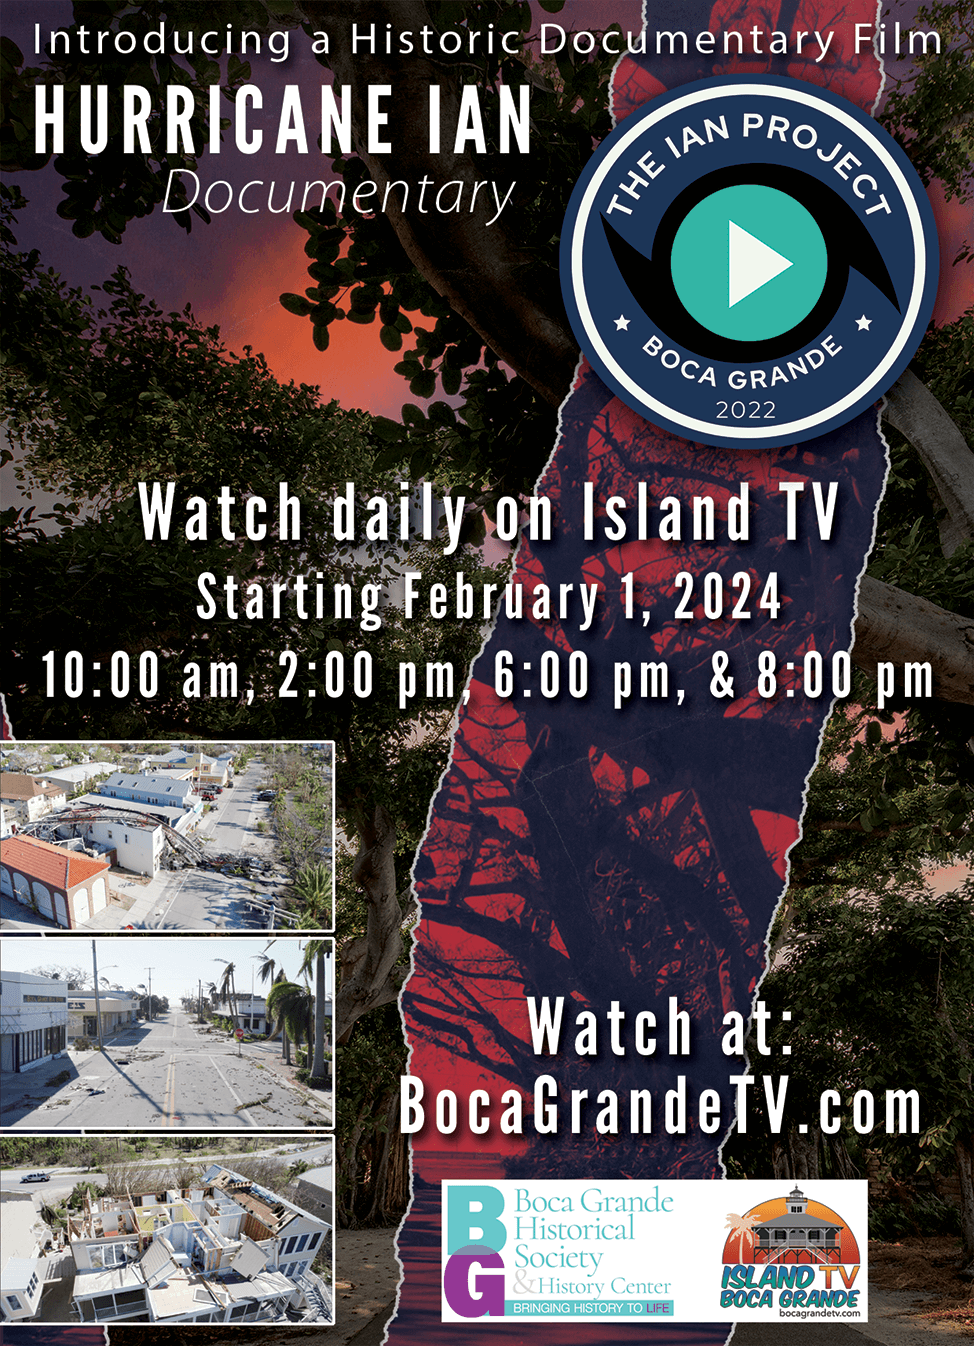 Hurricane Ian Documentary: THE IAN PROJECT - Watch daily on Island TV Starting February 1, 2024, 10:00 am, 2:00 pm, 6:00 pm, & 8:00 pm.